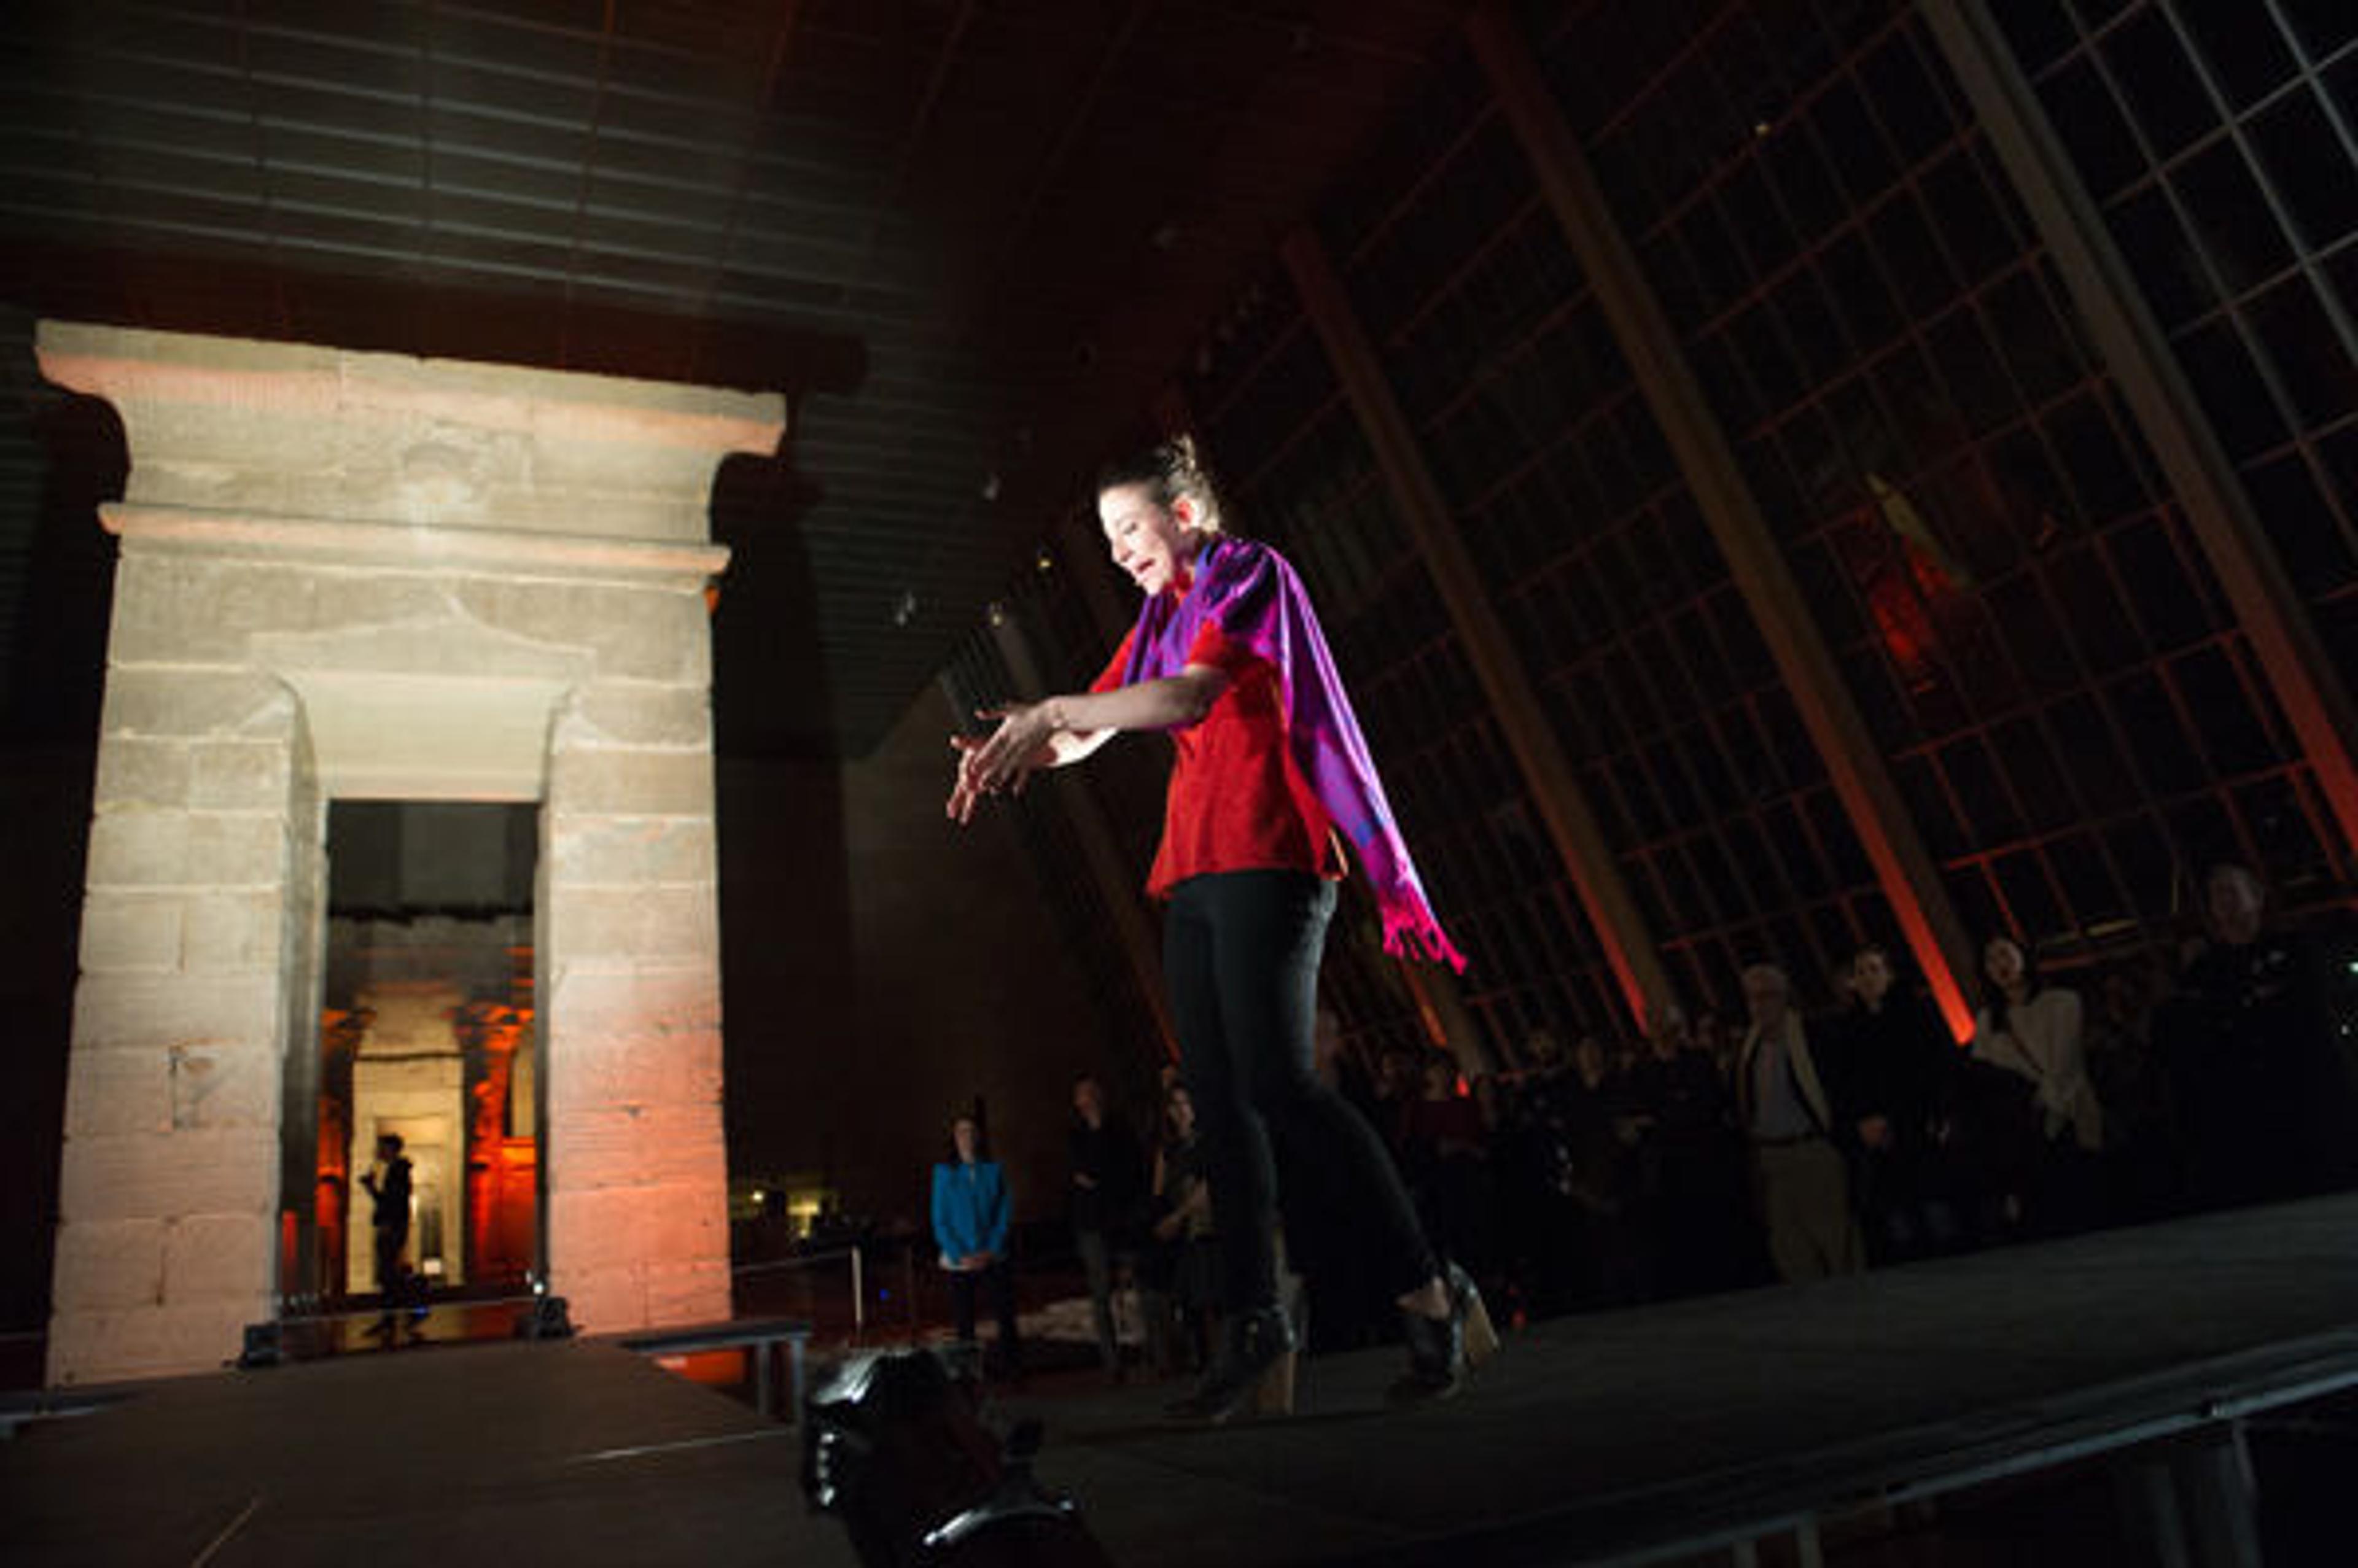 The Civilians present "The End and the Beginning" in The Temple of Dendur, March 2015. © Paula Lobo